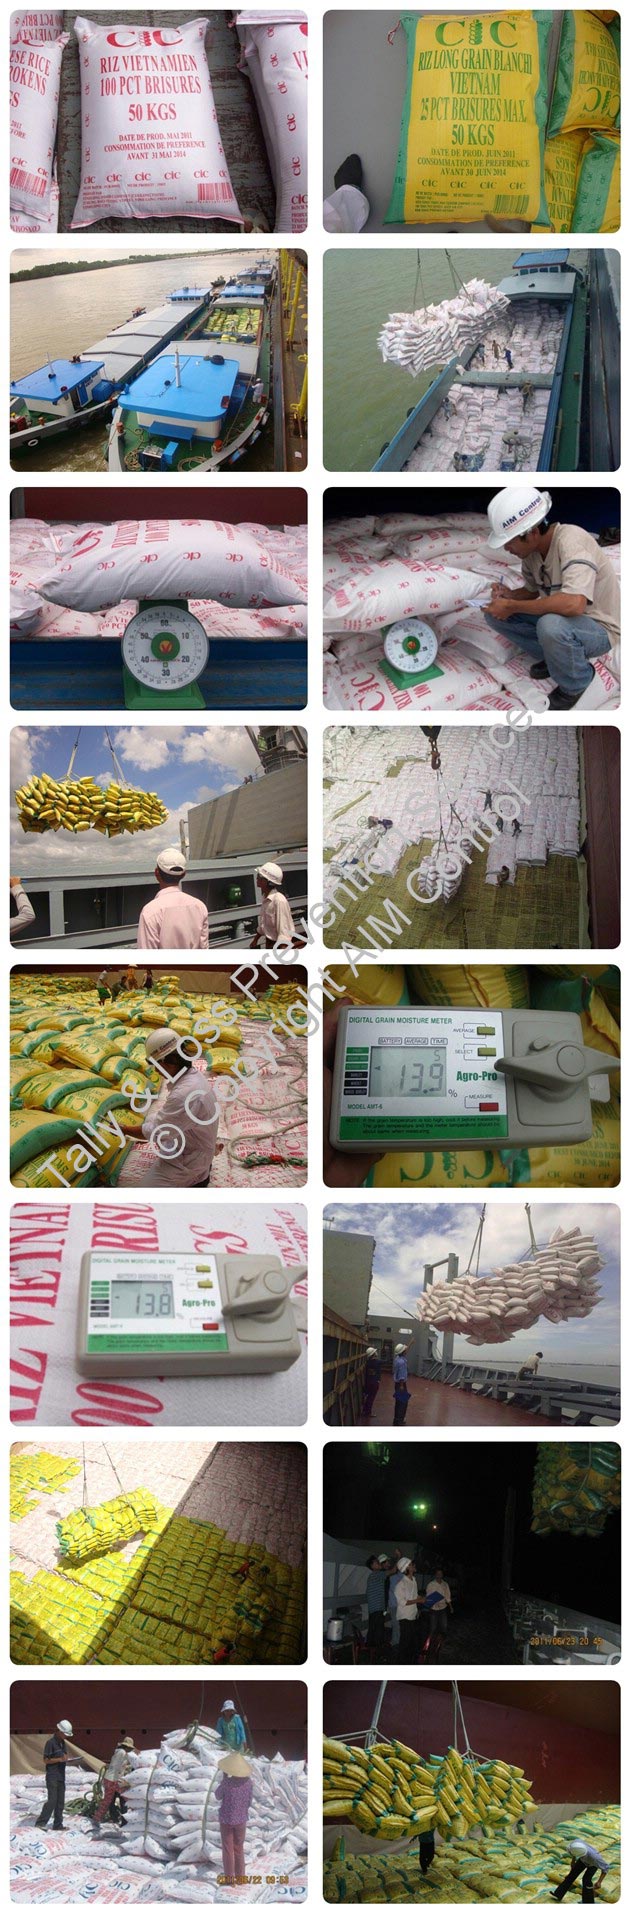 Tally_of_cargo_PREVENTION_LOSS_for_White_rice_in_bag_in_Vietnam_Thailand_AIMControl